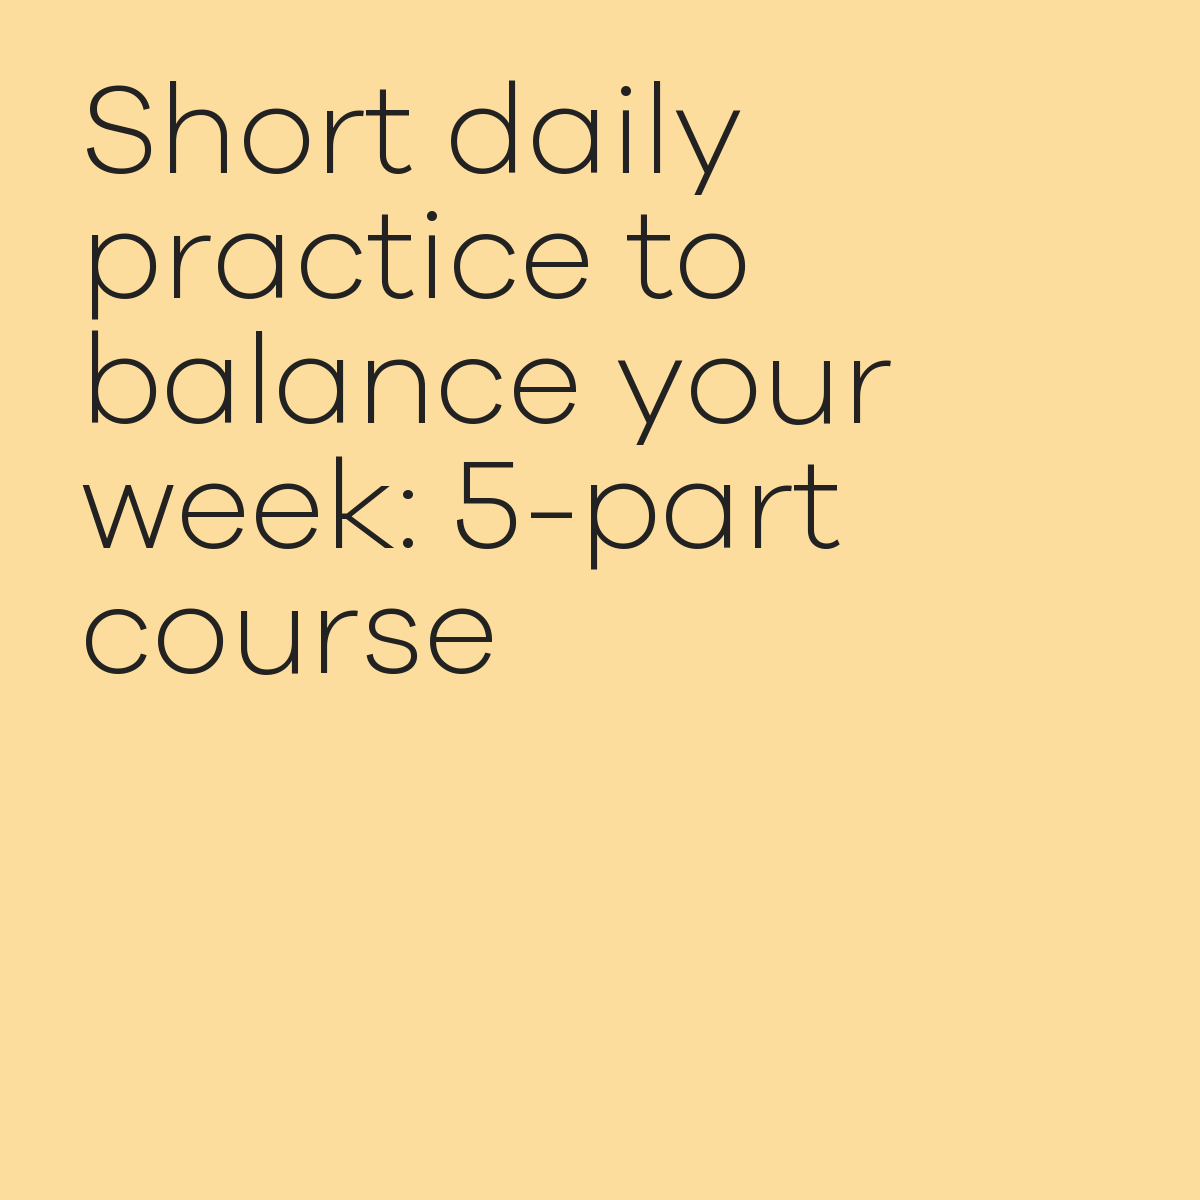 Short daily practice to balance your week